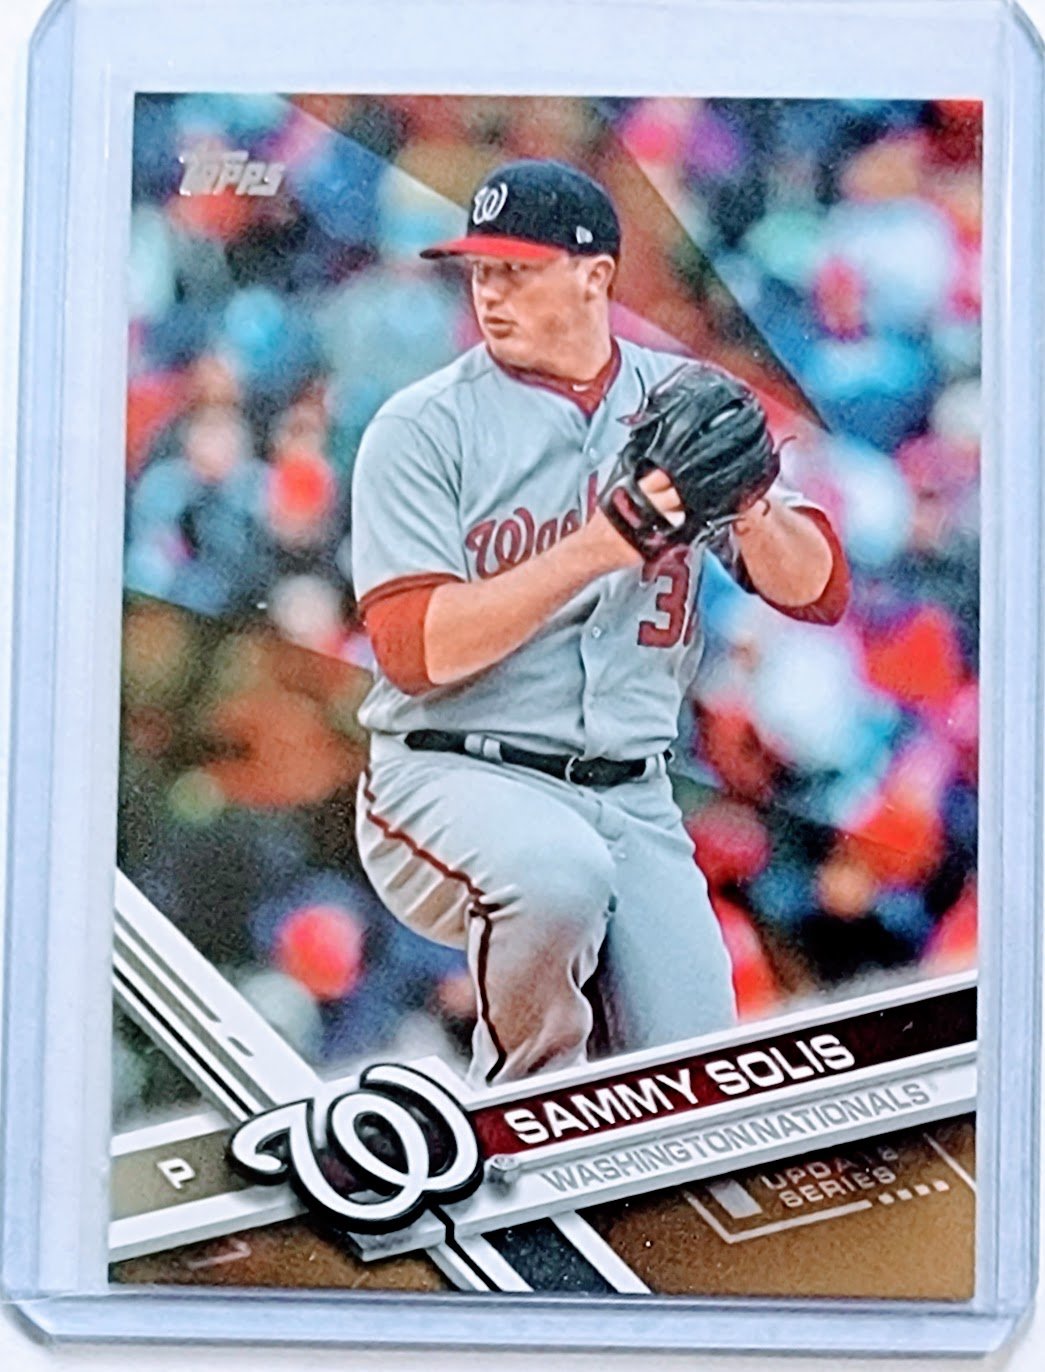 2017 Topps Update Sammy Solis Gold #'d/2017 Parallel Baseball Card TPTV simple Xclusive Collectibles   